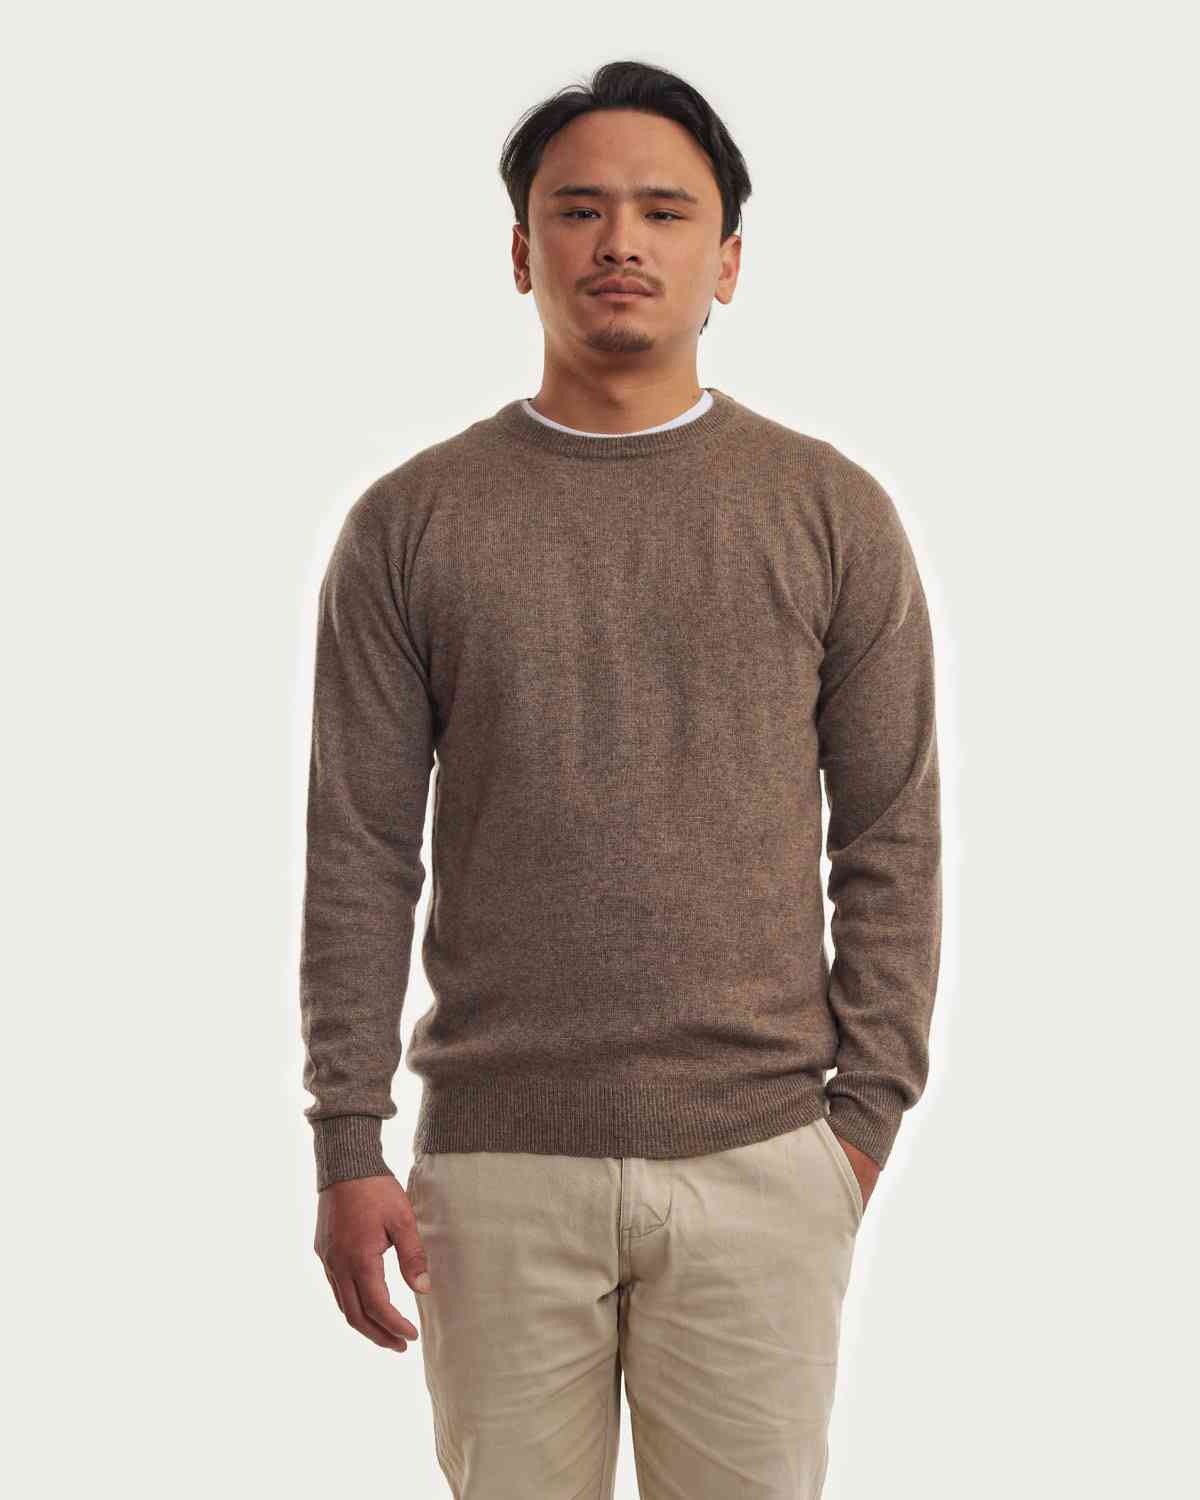 Men’s Round Neck 100% Cashmere Sweater/Pullover. Made in Nepal